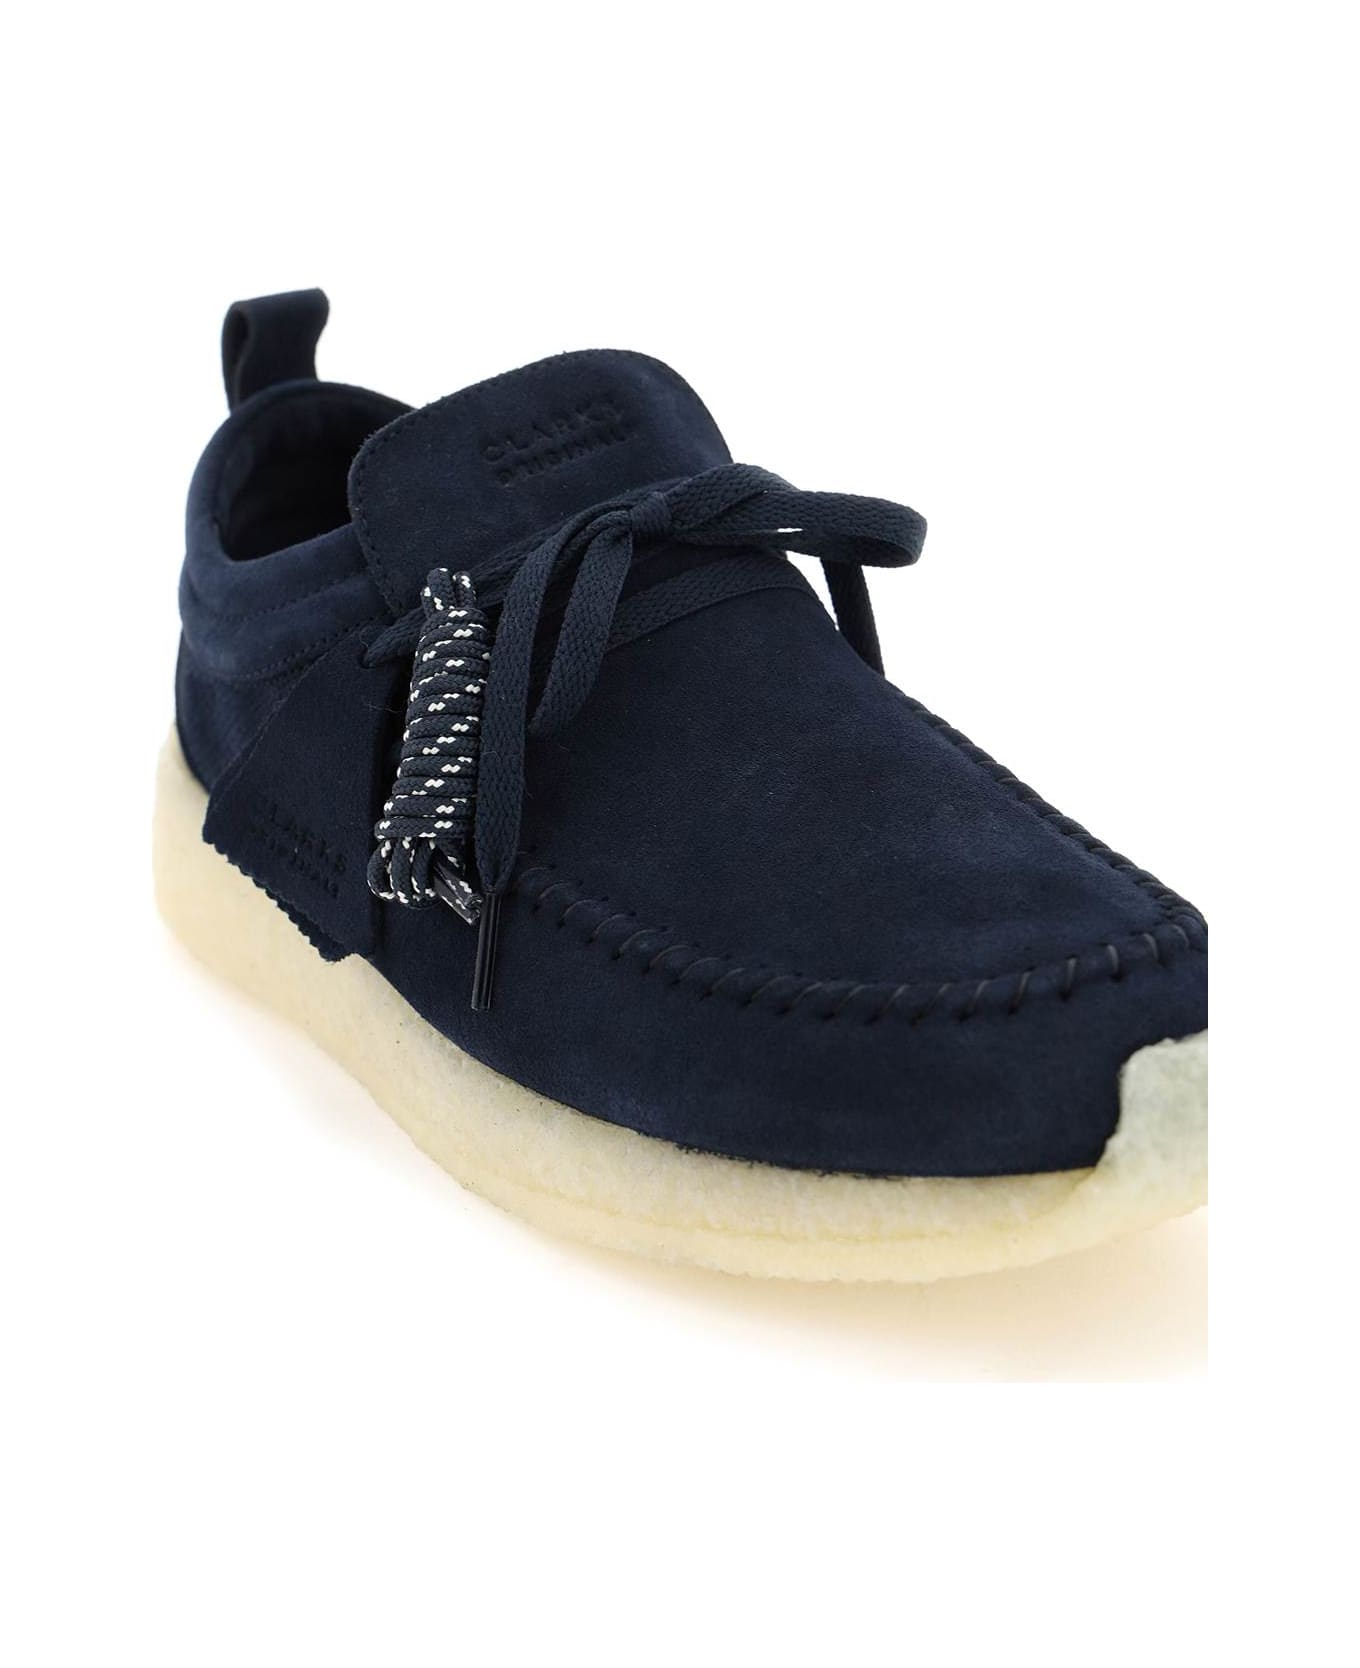 Clarks 'maycliffe' Lace-up Shoes - DARK BLUE (Blue)